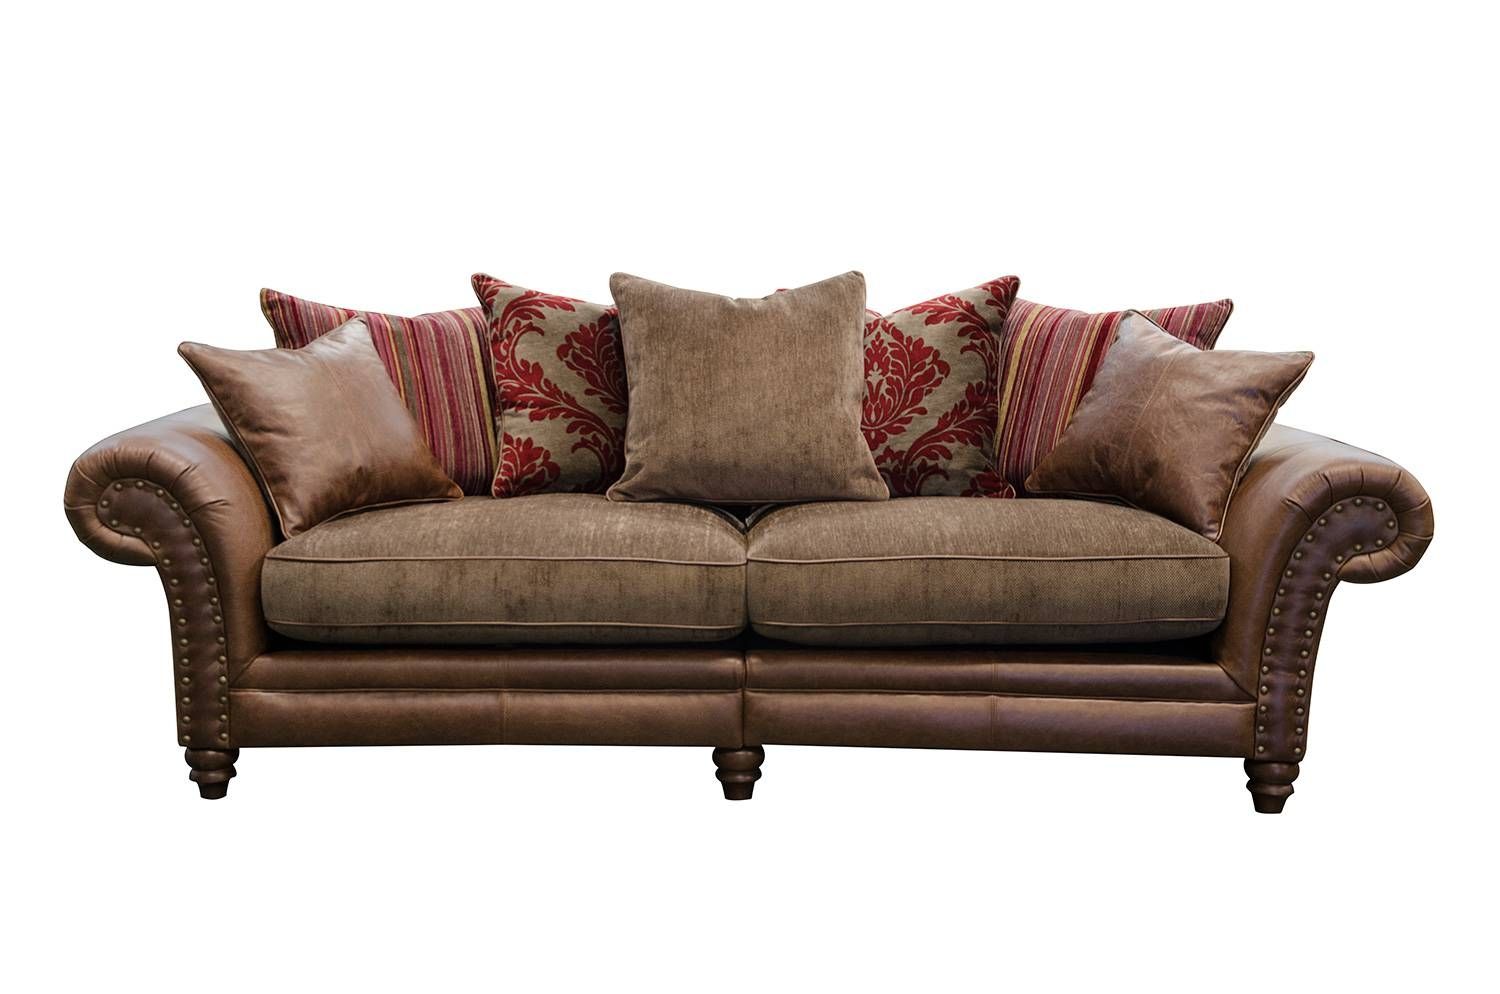 Hudson 4 Seater Sofa – Alexander And James For 4 Seater Sofas (View 26 of 30)